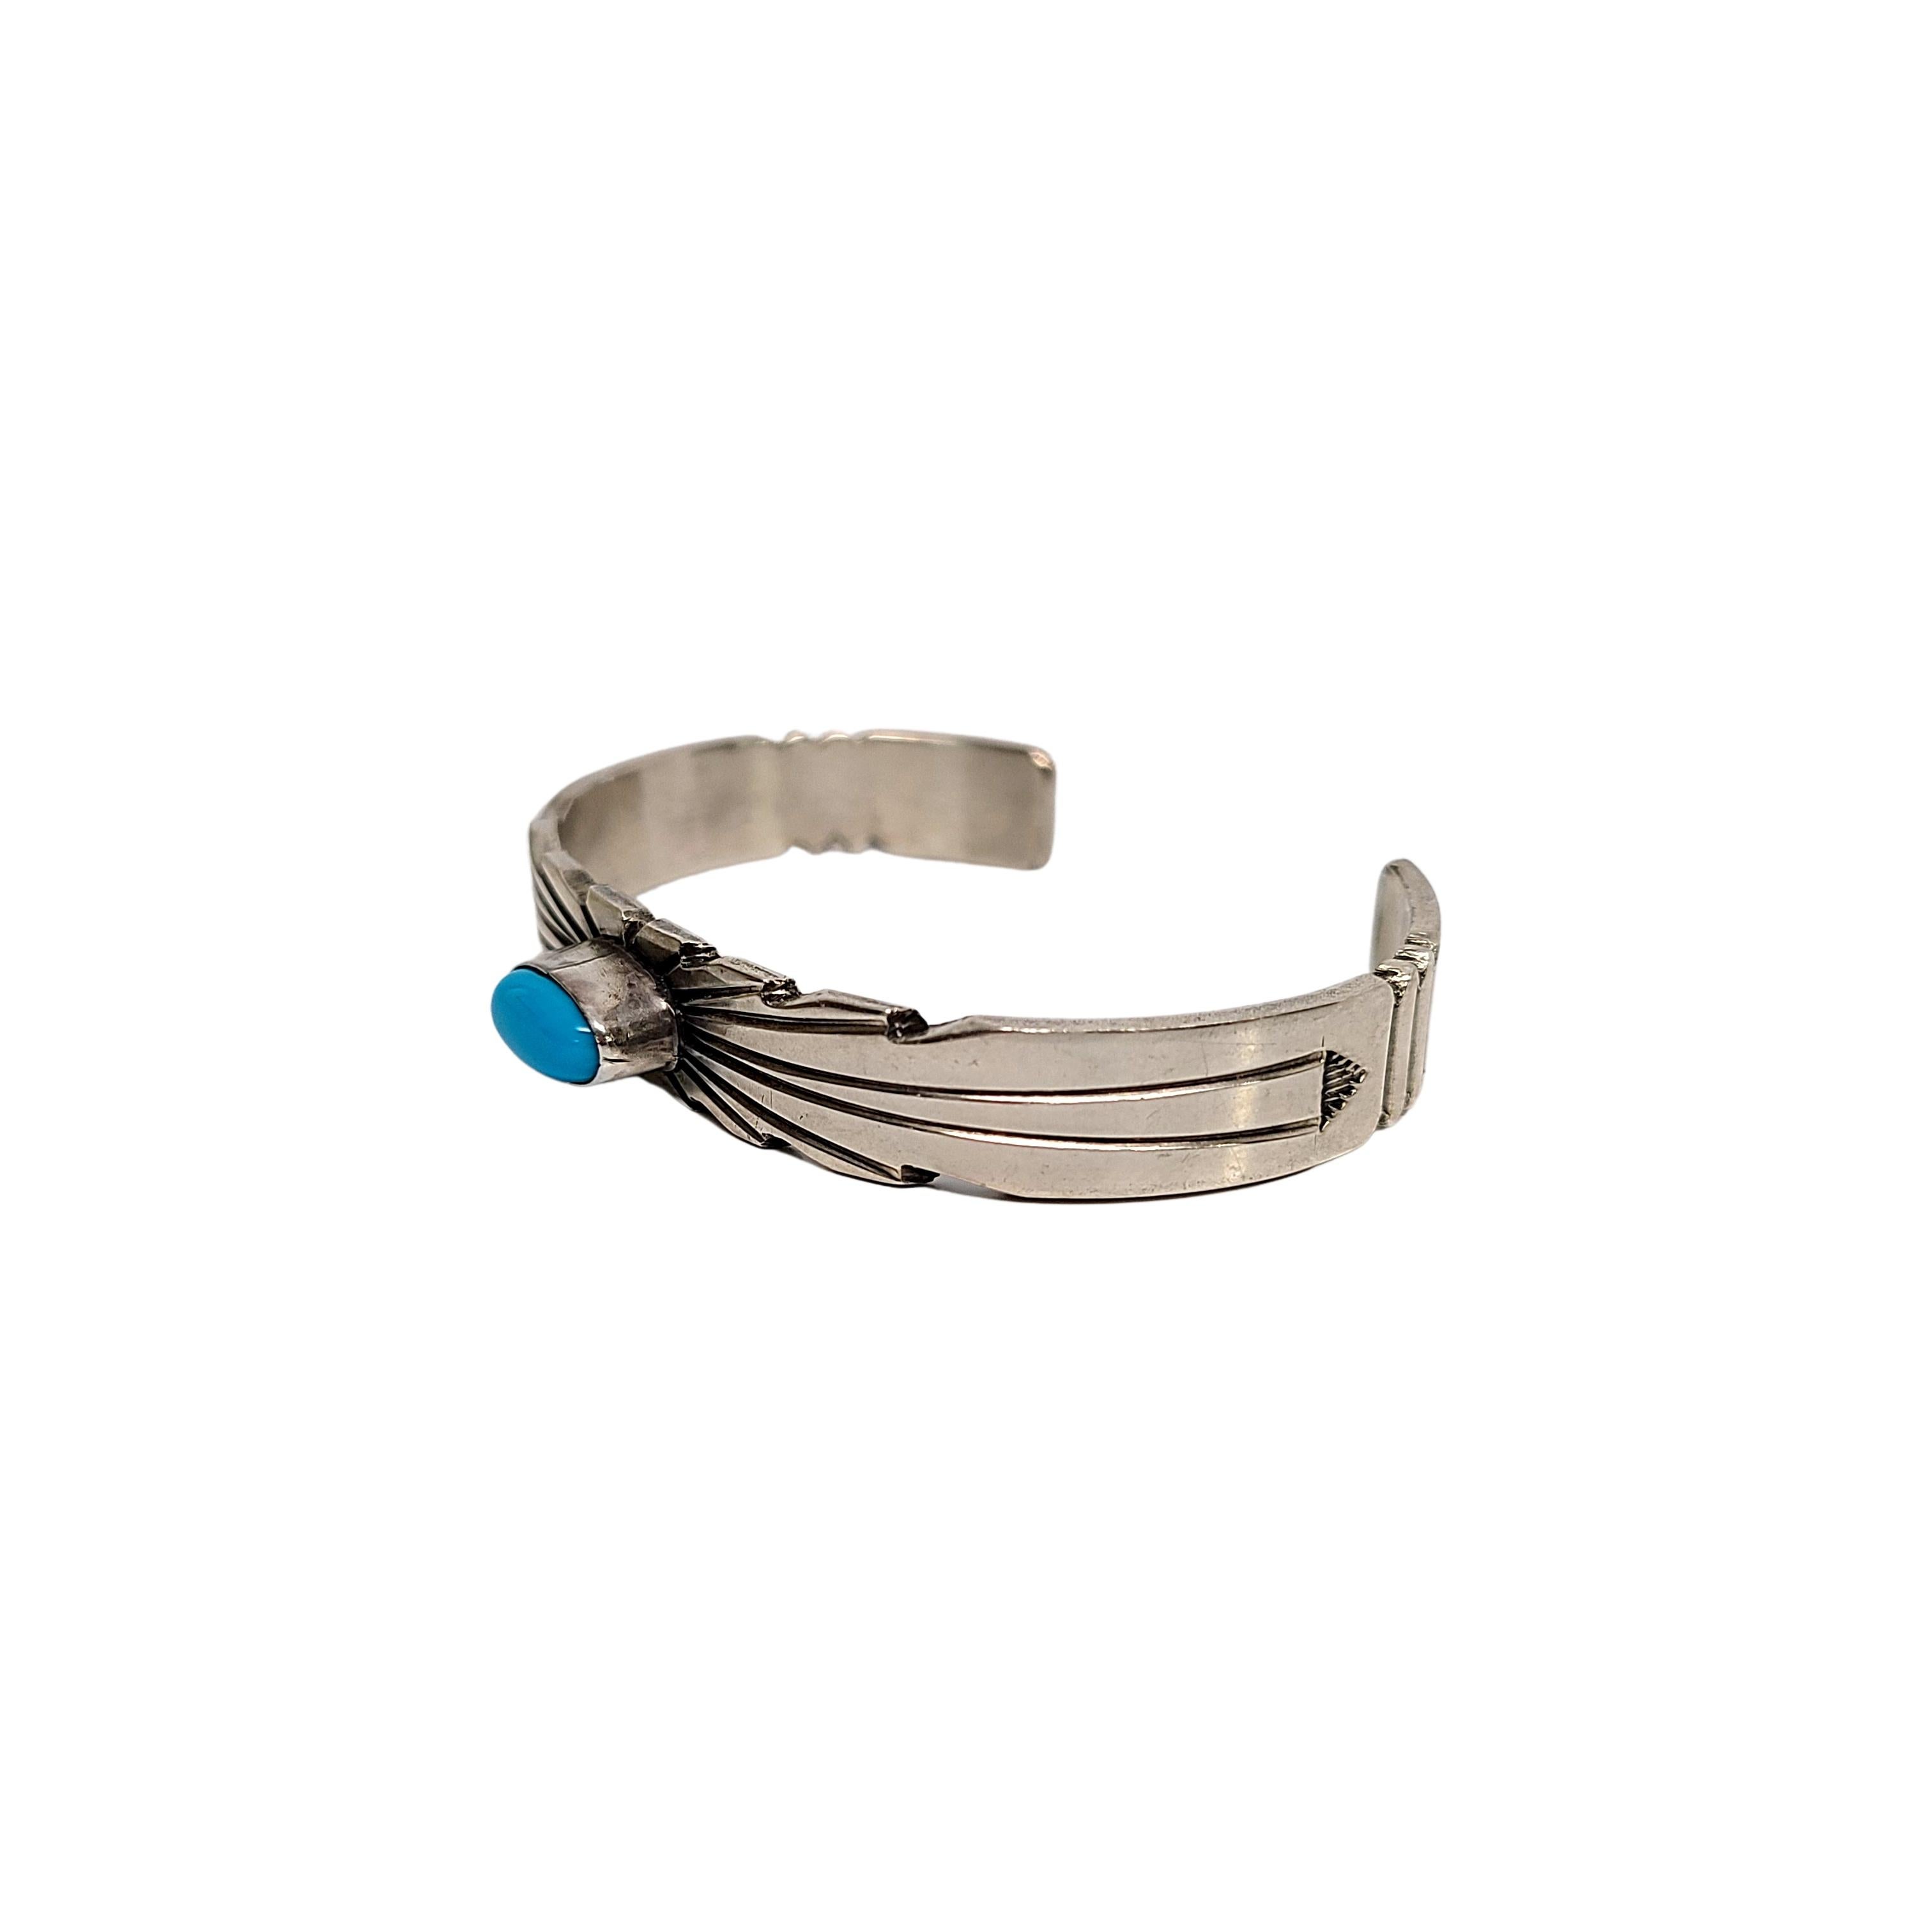 Sterling silver and turquoise cuff bracelet by Native American artisan, Ray Bennett.

Bezel set oval turquoise in the middle of a traditional starburst design with stamped arrow accents at ends.

Measures approx 5 1/4